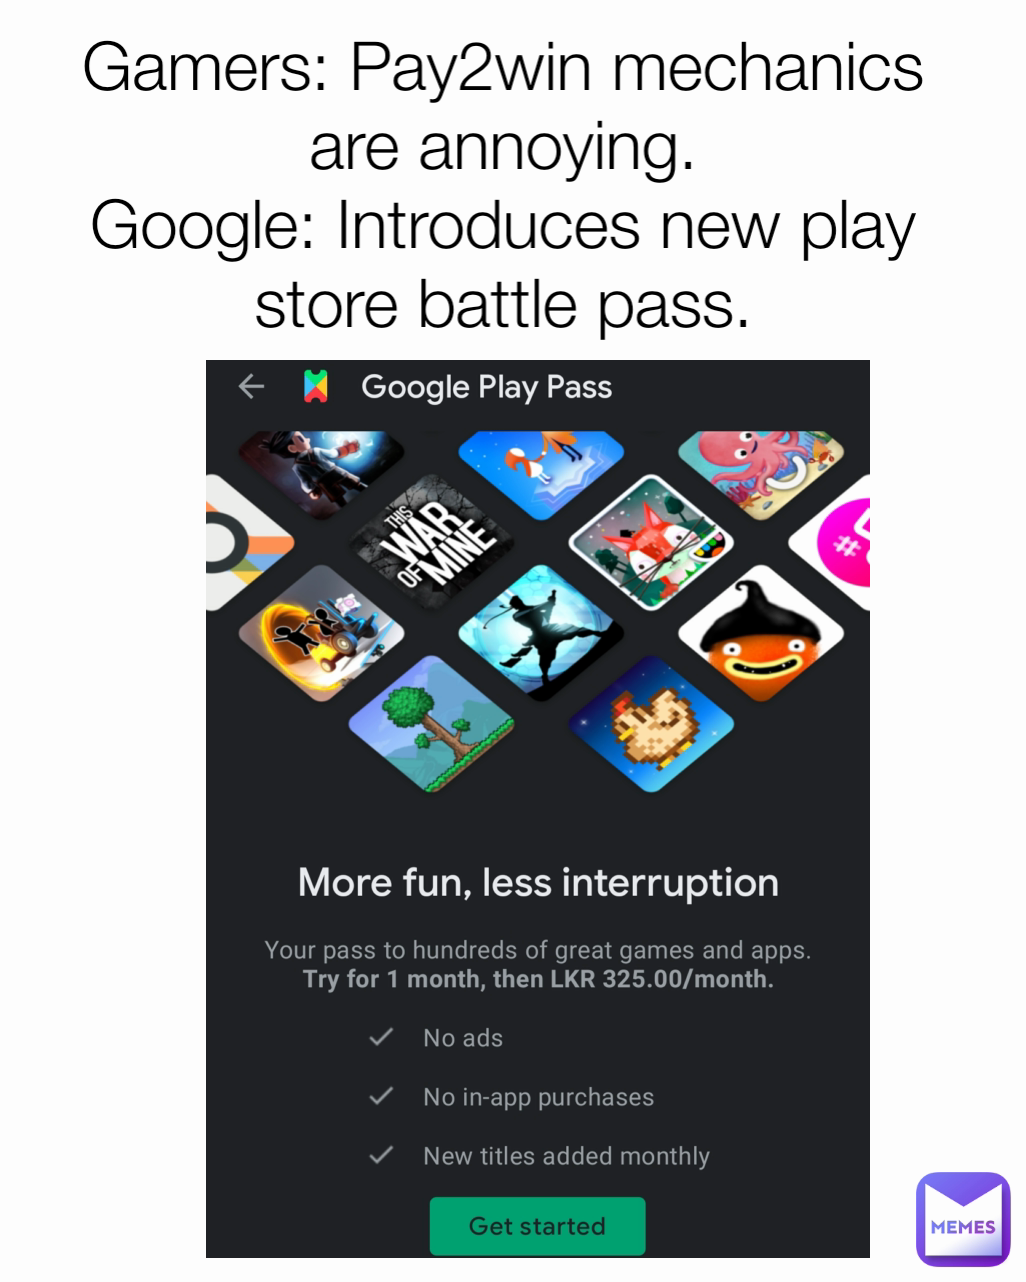 Gamers: Pay2win mechanics are annoying.
Google: Introduces new play store battle pass.